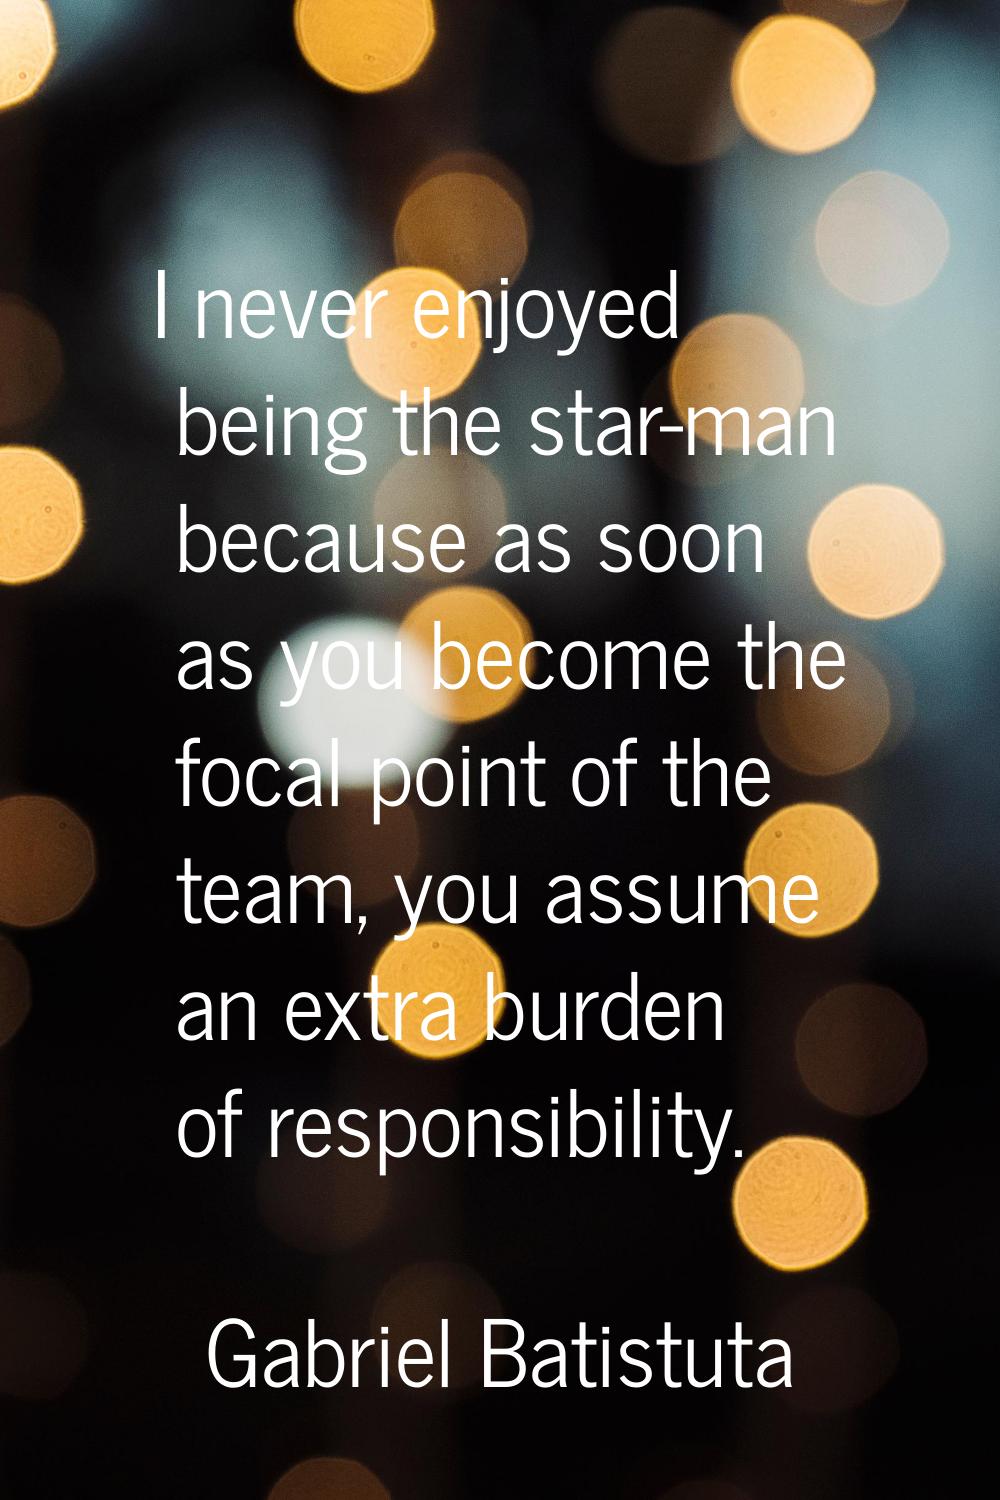 I never enjoyed being the star-man because as soon as you become the focal point of the team, you a